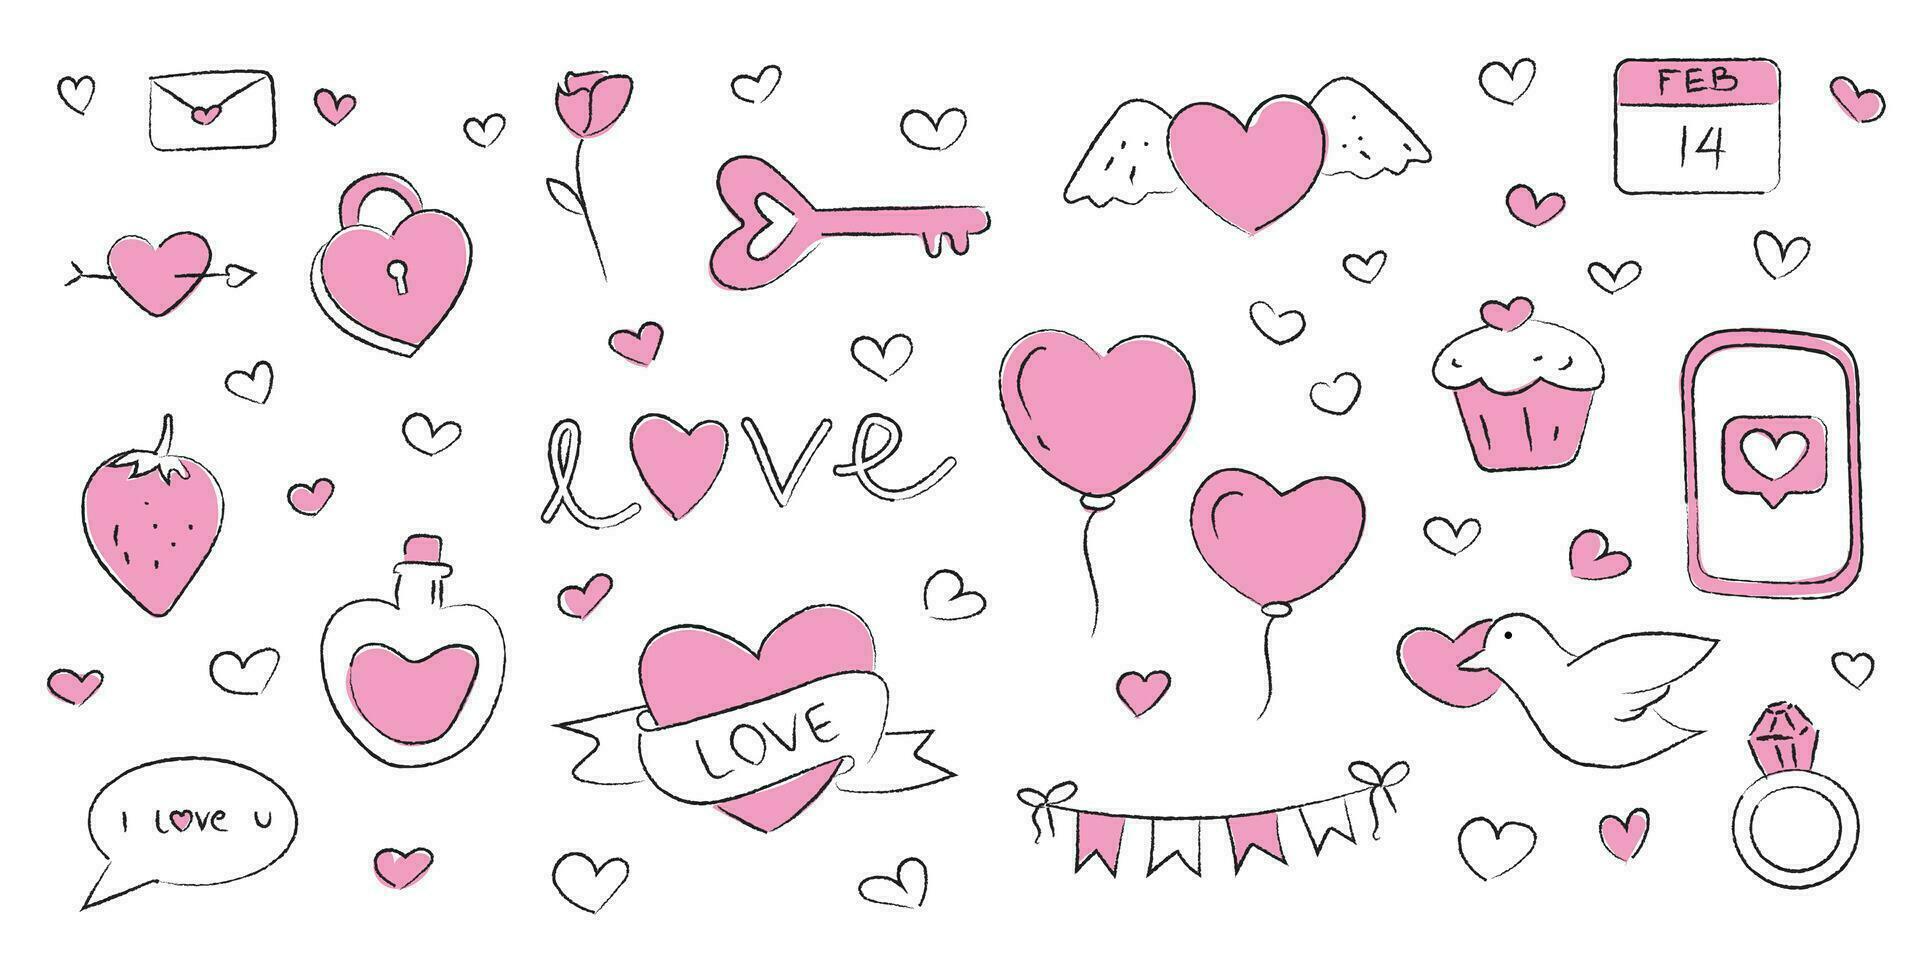 Valentine's Day Hand-Drawn Doodle Elements, Hand-Drawn Valentine's Day Doodle Icons, Valentine's Day Doodle Elements Pack vector